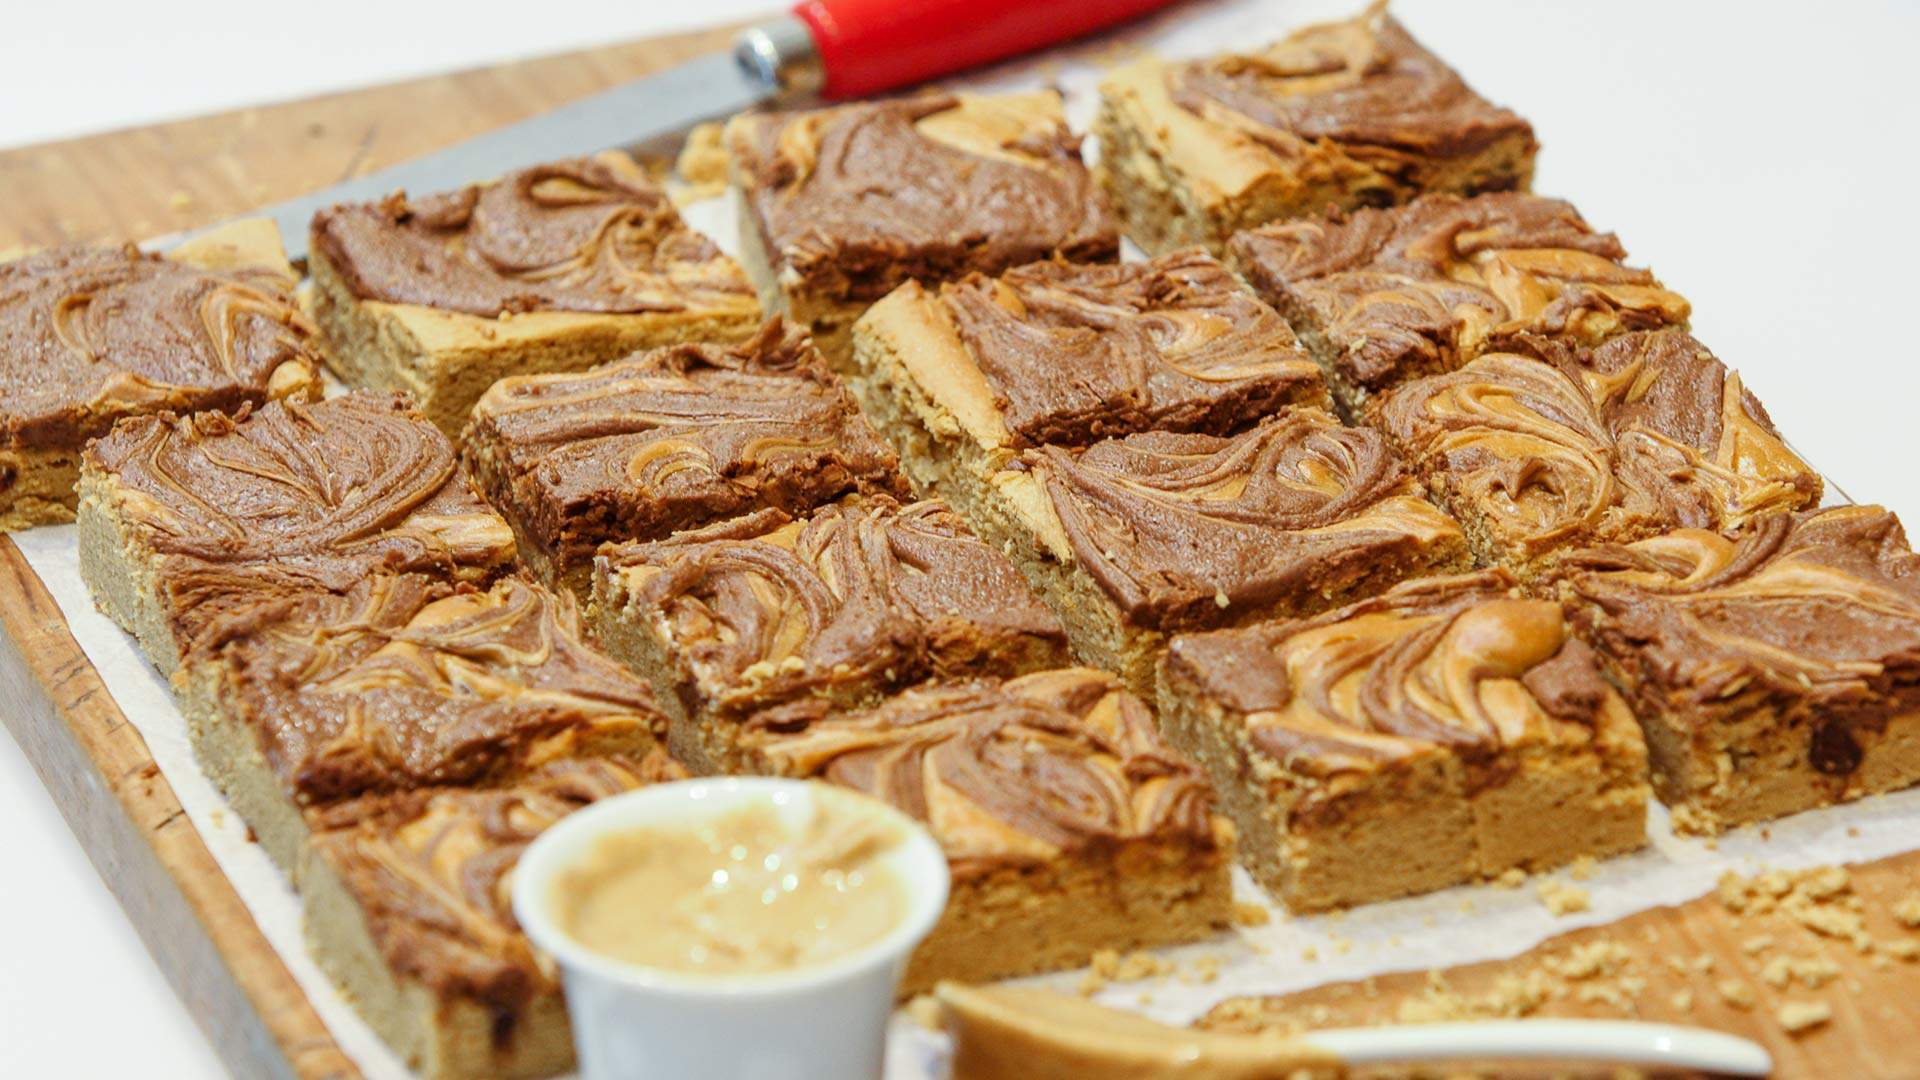 Leichhardt Is Getting a Cafe Dedicated to Peanut Butter in All Its Forms